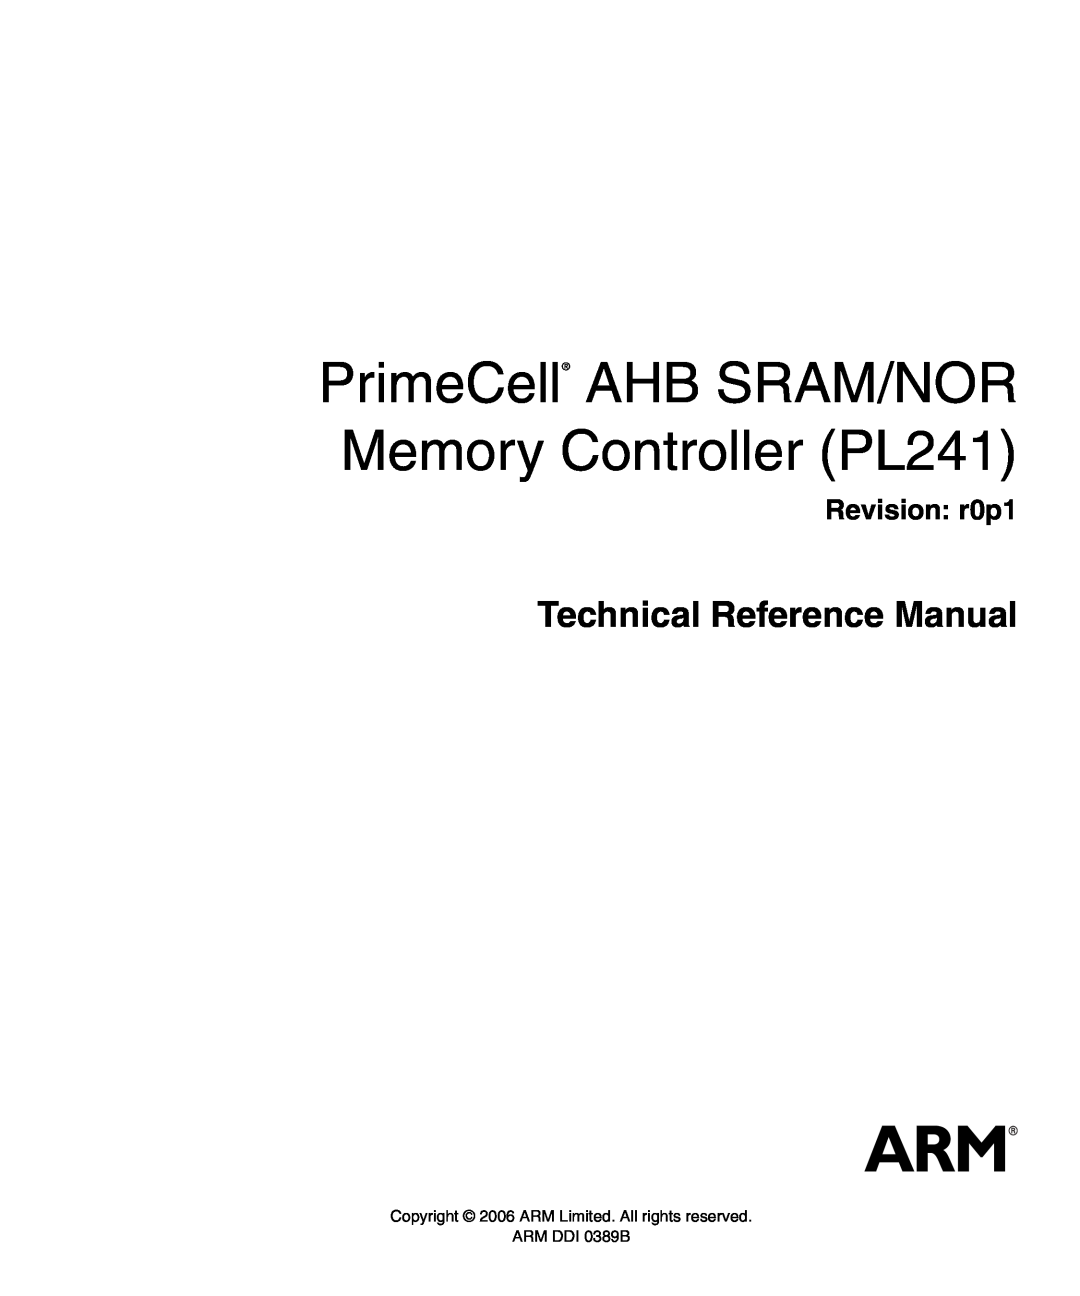 SMC Networks manual PrimeCell AHB SRAM/NOR Memory Controller PL241, Technical Reference Manual, Revision r0p1 